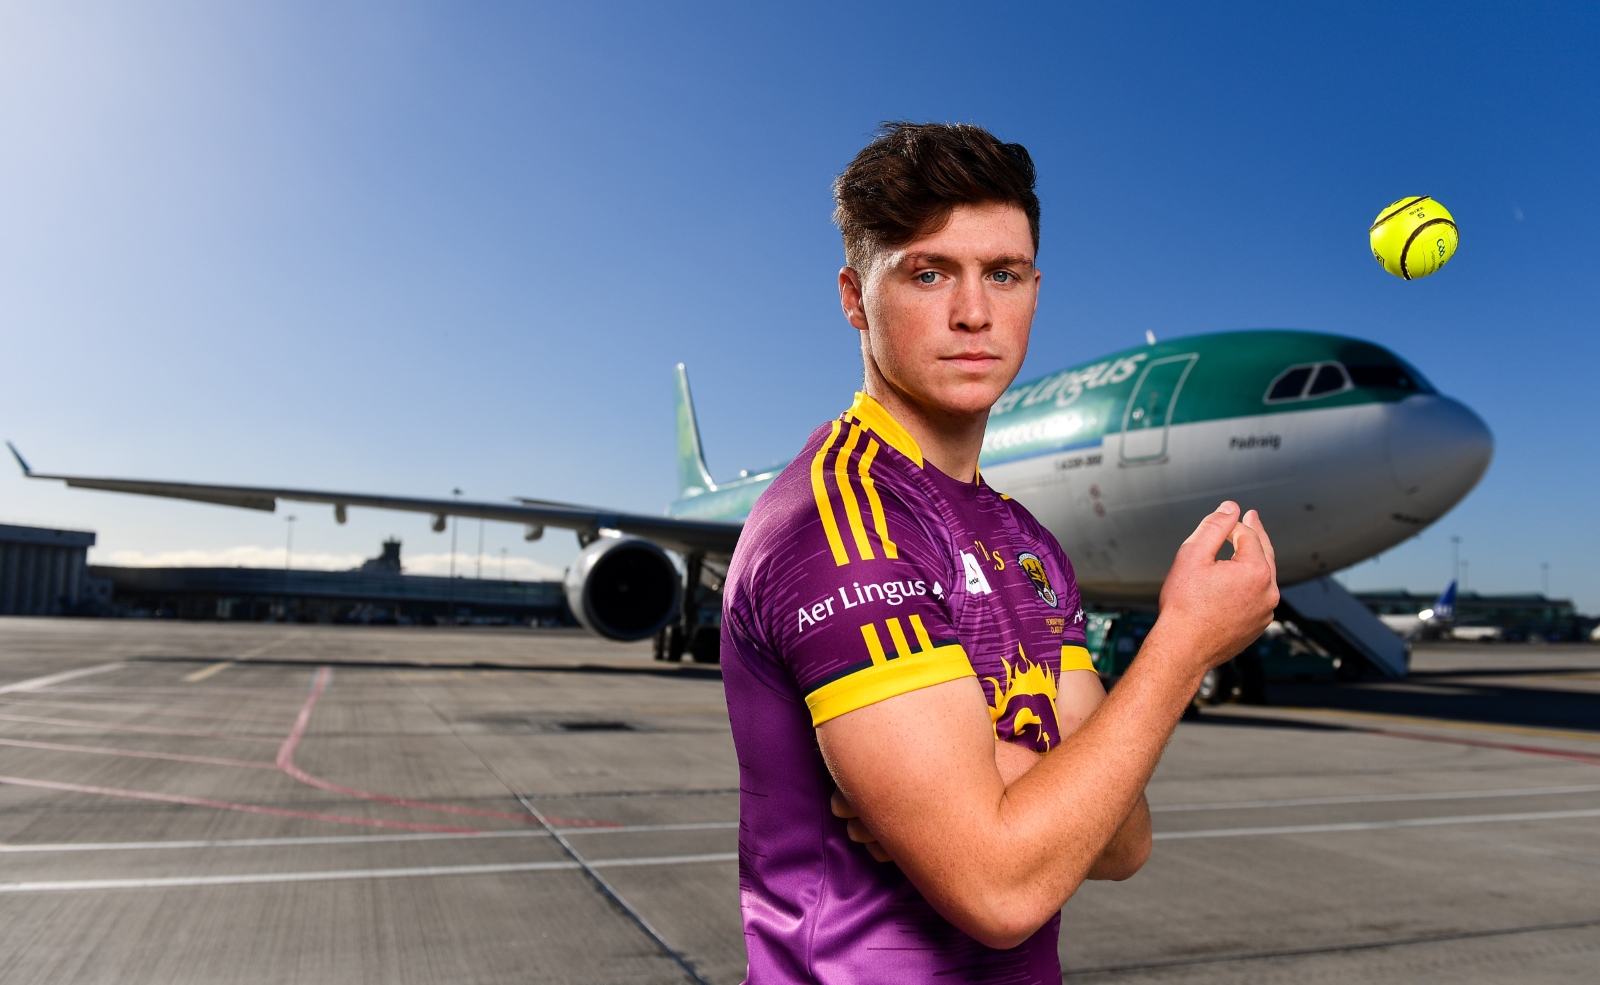 Jersey launch day at our Dublin Airport HQ - Aer Lingus Blog